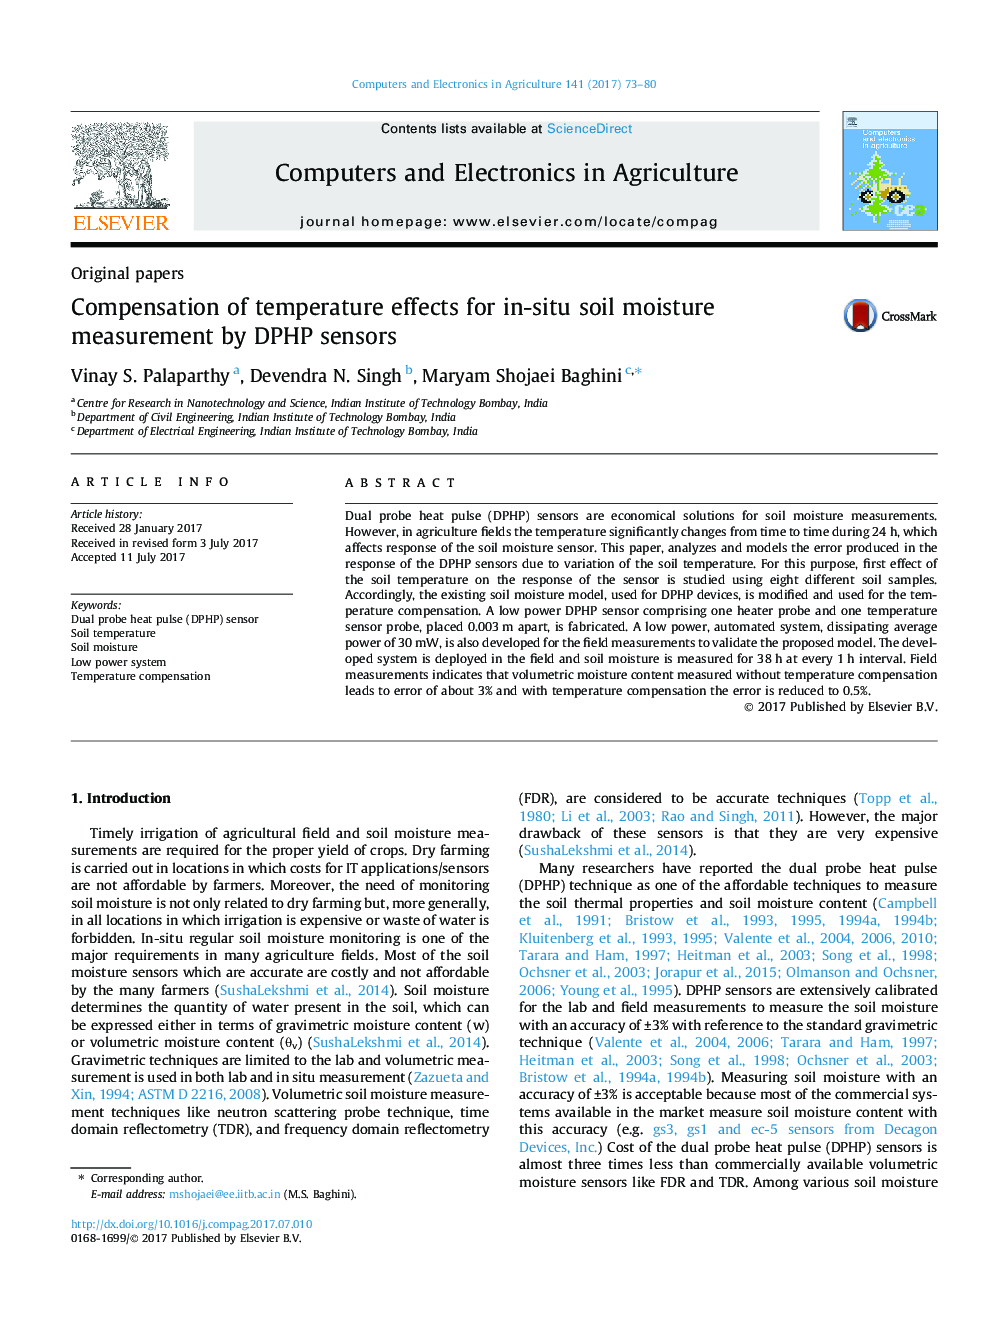 Compensation of temperature effects for in-situ soil moisture measurement by DPHP sensors